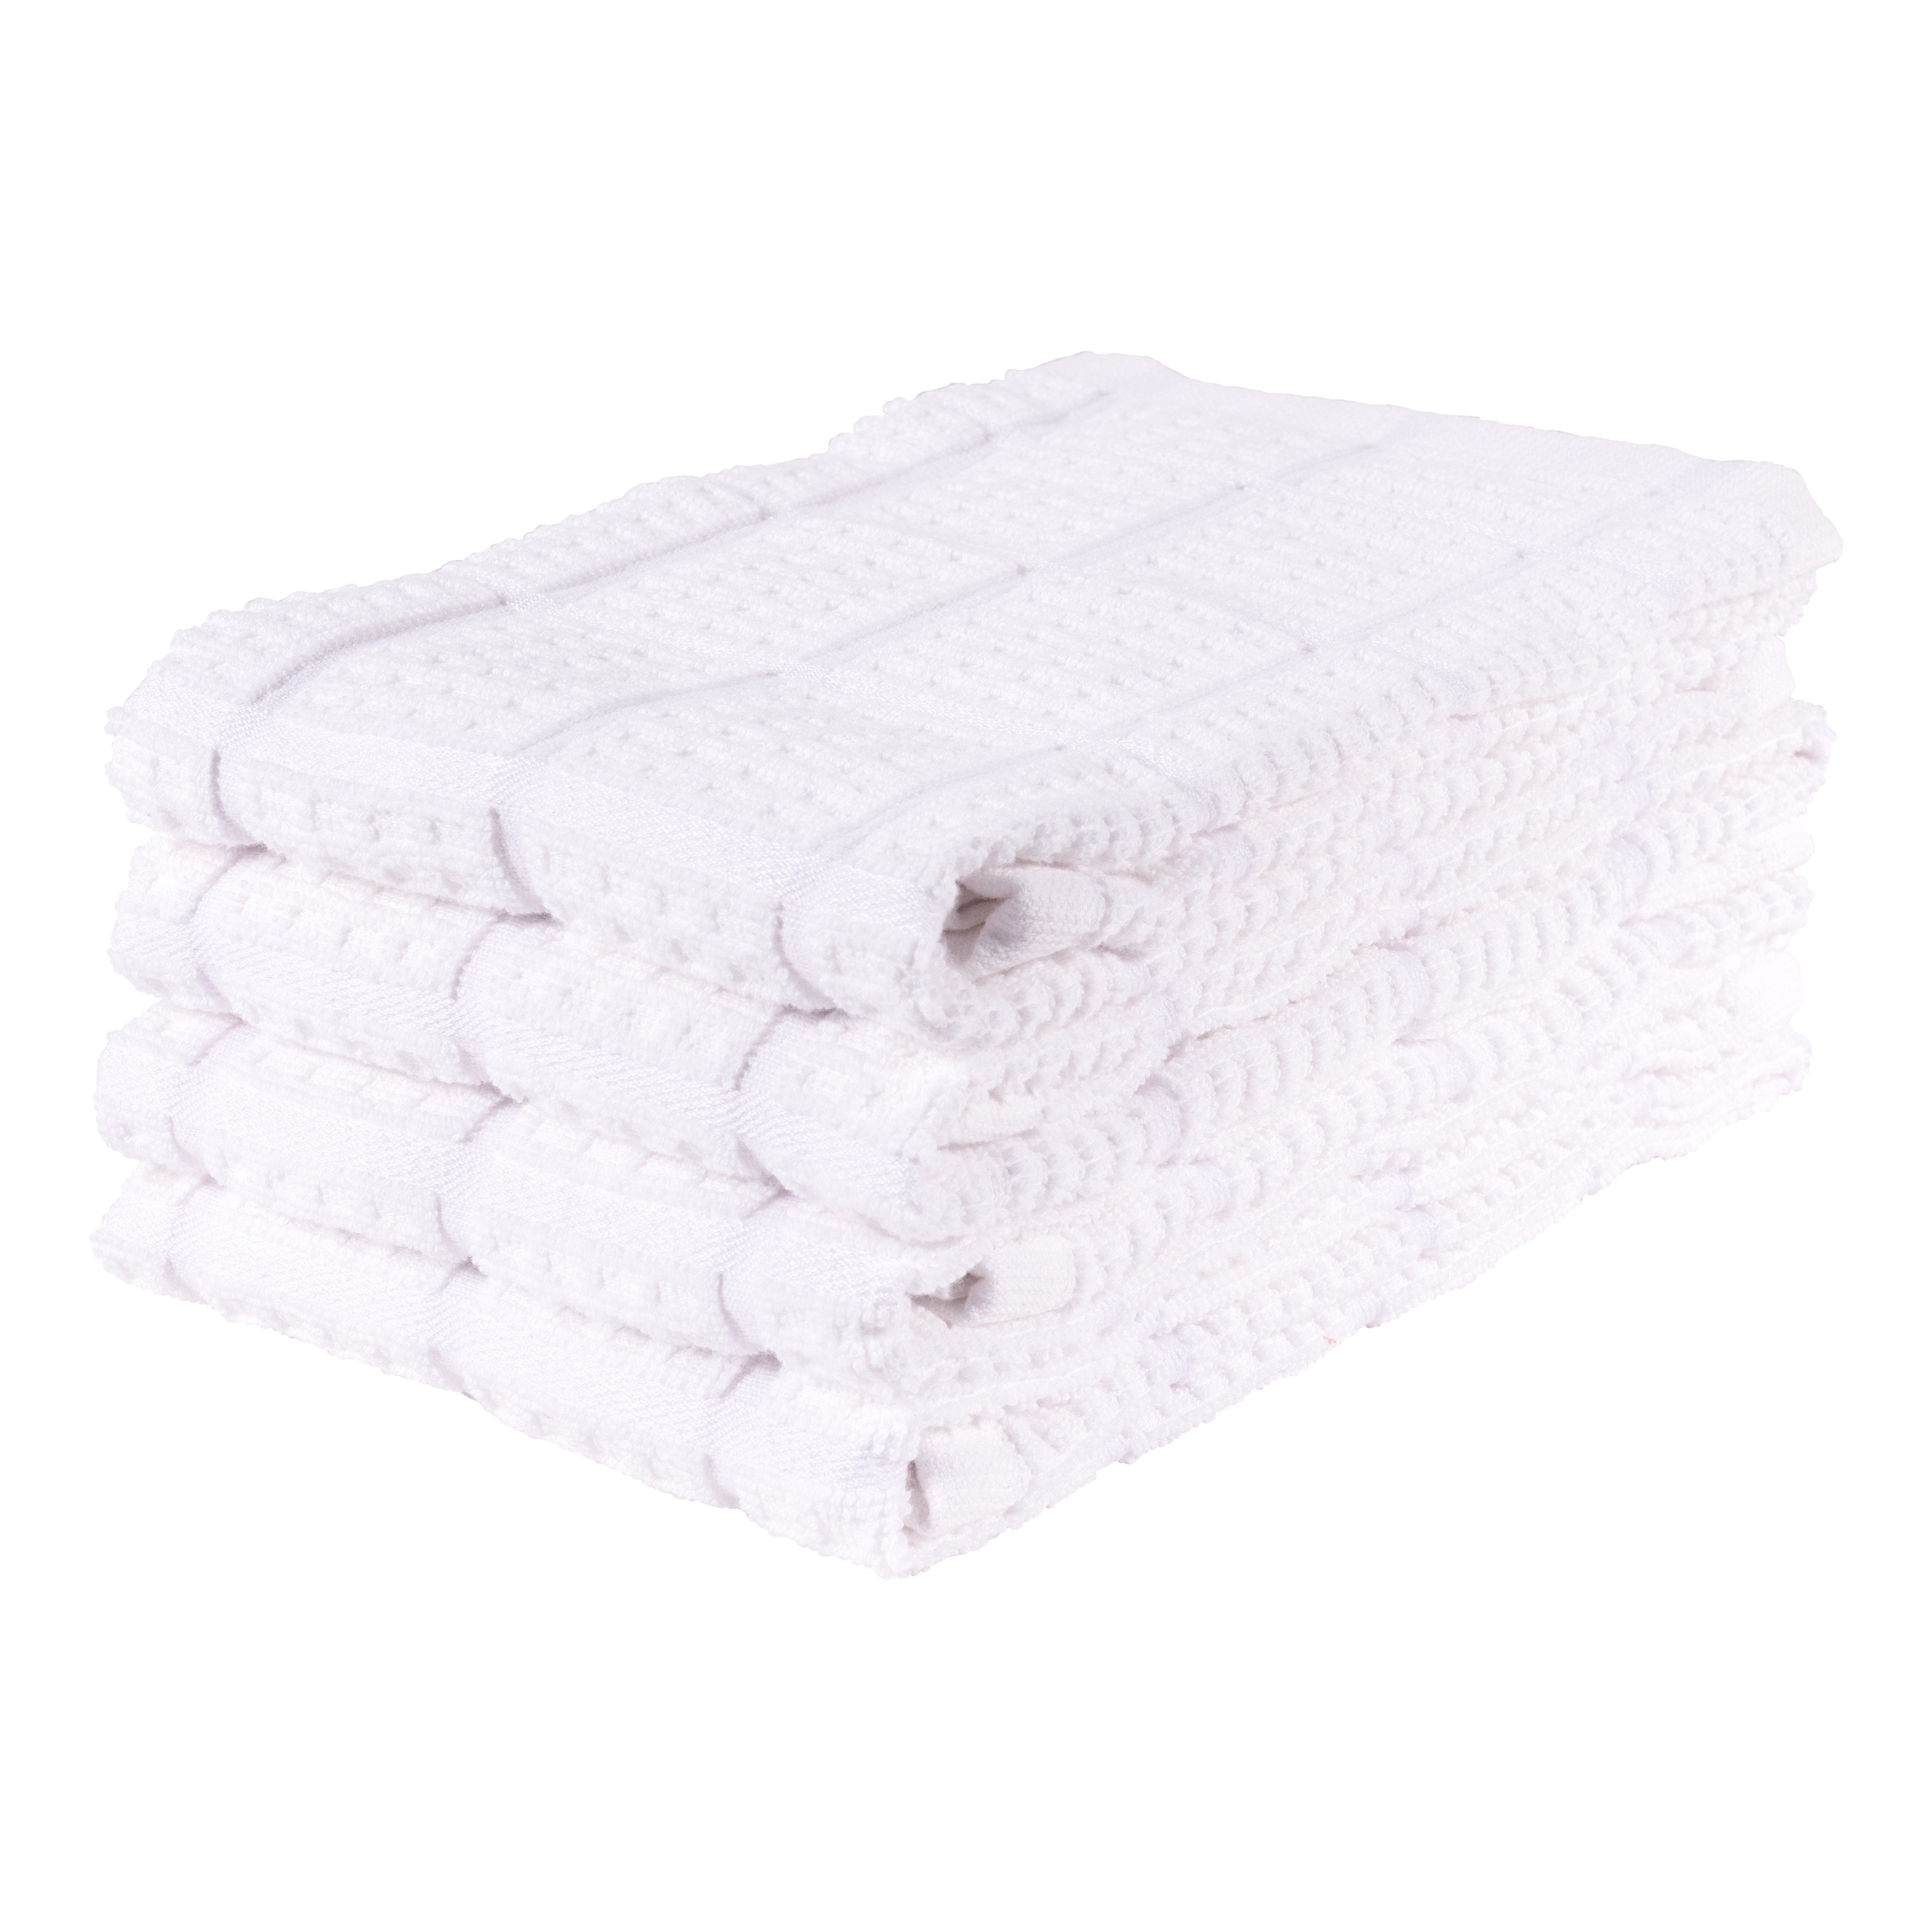 NWT Simply Essential LT. ALLOY/ WHITE 4 Piece HAND Towel Set 100% cotton